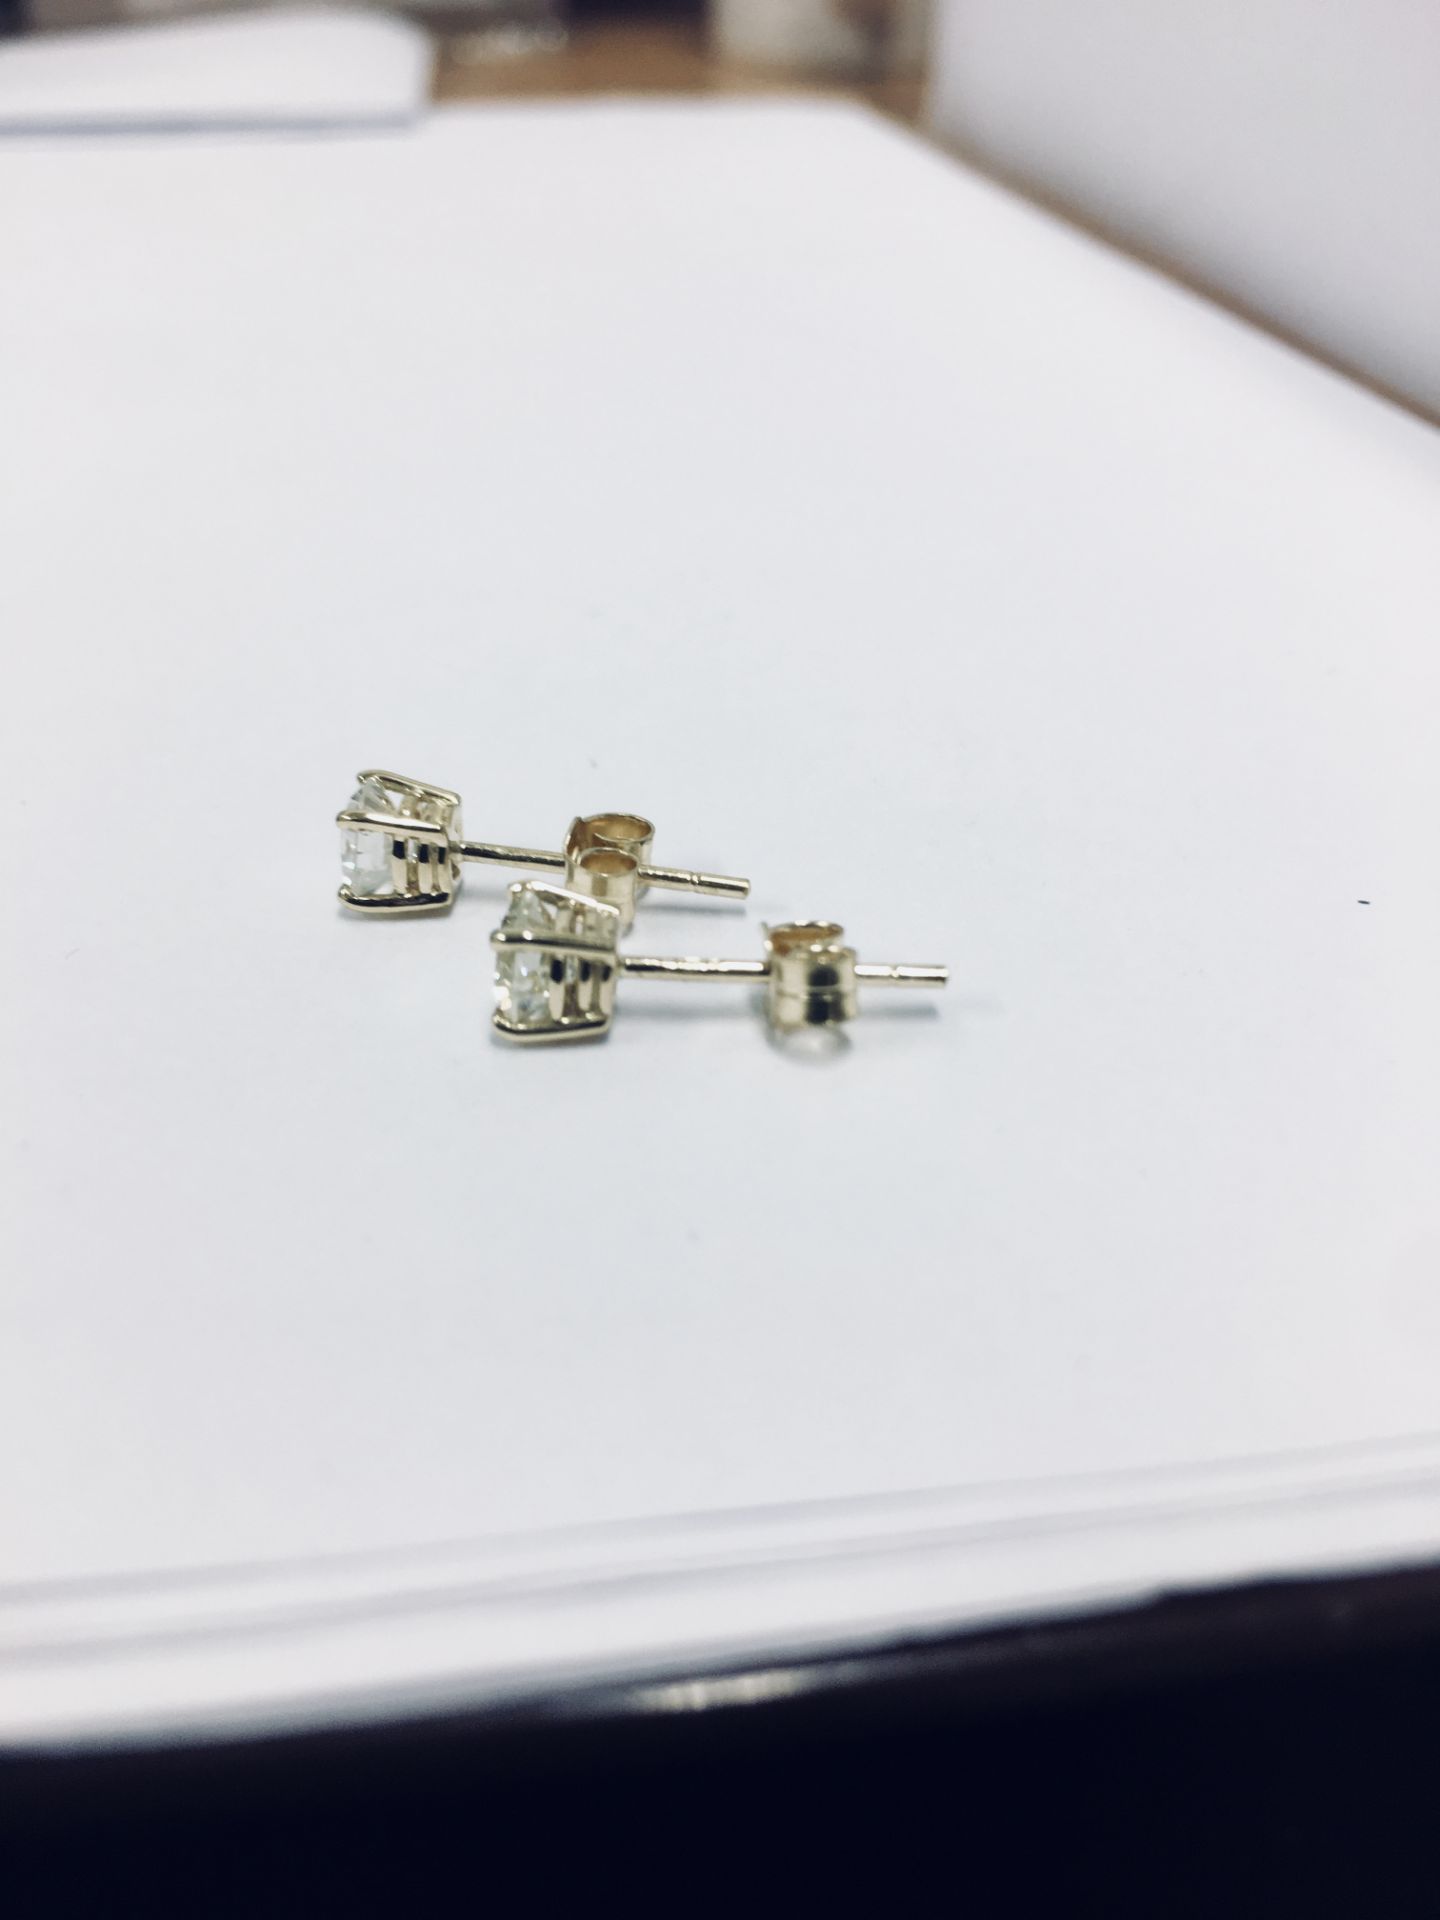 1.00Ct Diamond Solitaire Earrings Set In 18Ct Yellow Gold. - Image 8 of 19